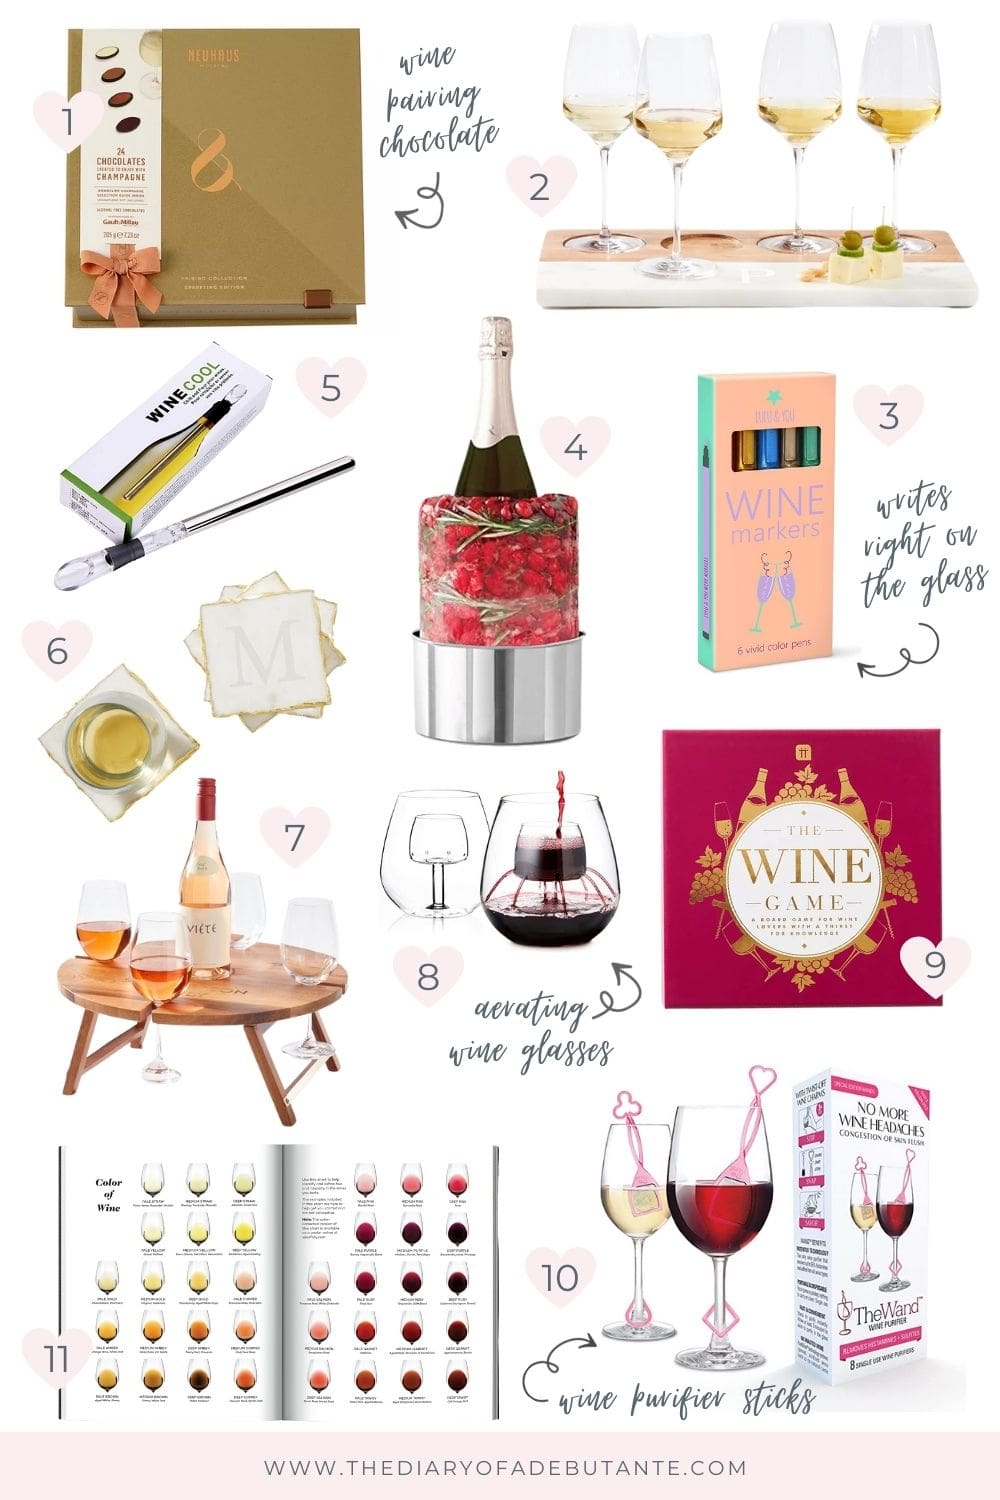 Inexpensive gift ideas for wine lovers rounded up by blogger Stephanie Ziajka on Diary of a Debutante